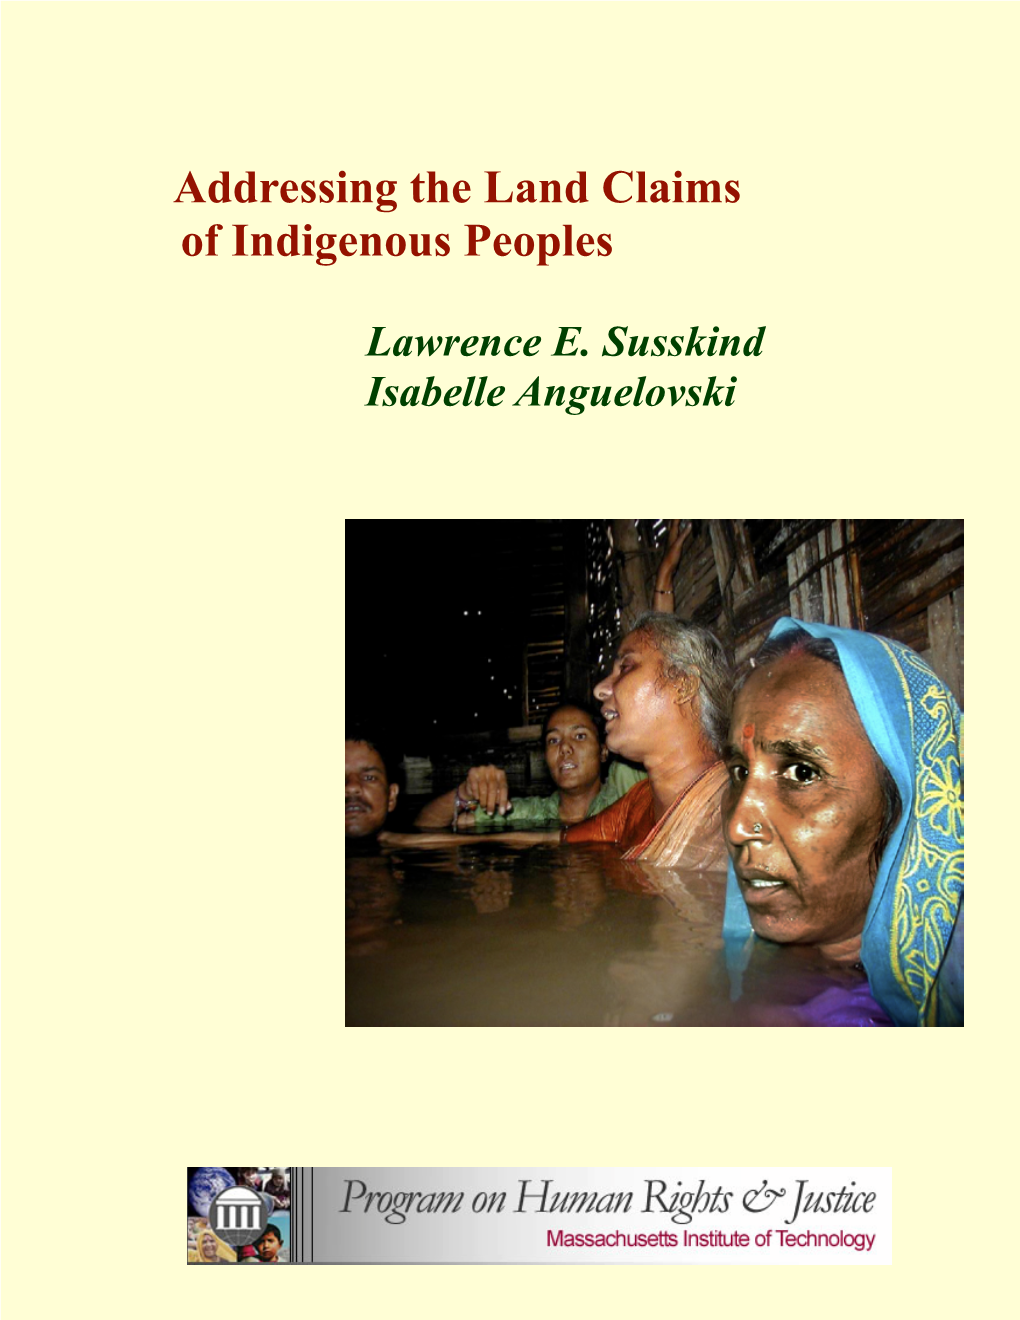 Addressing the Land Claims of Indigenous Peoples